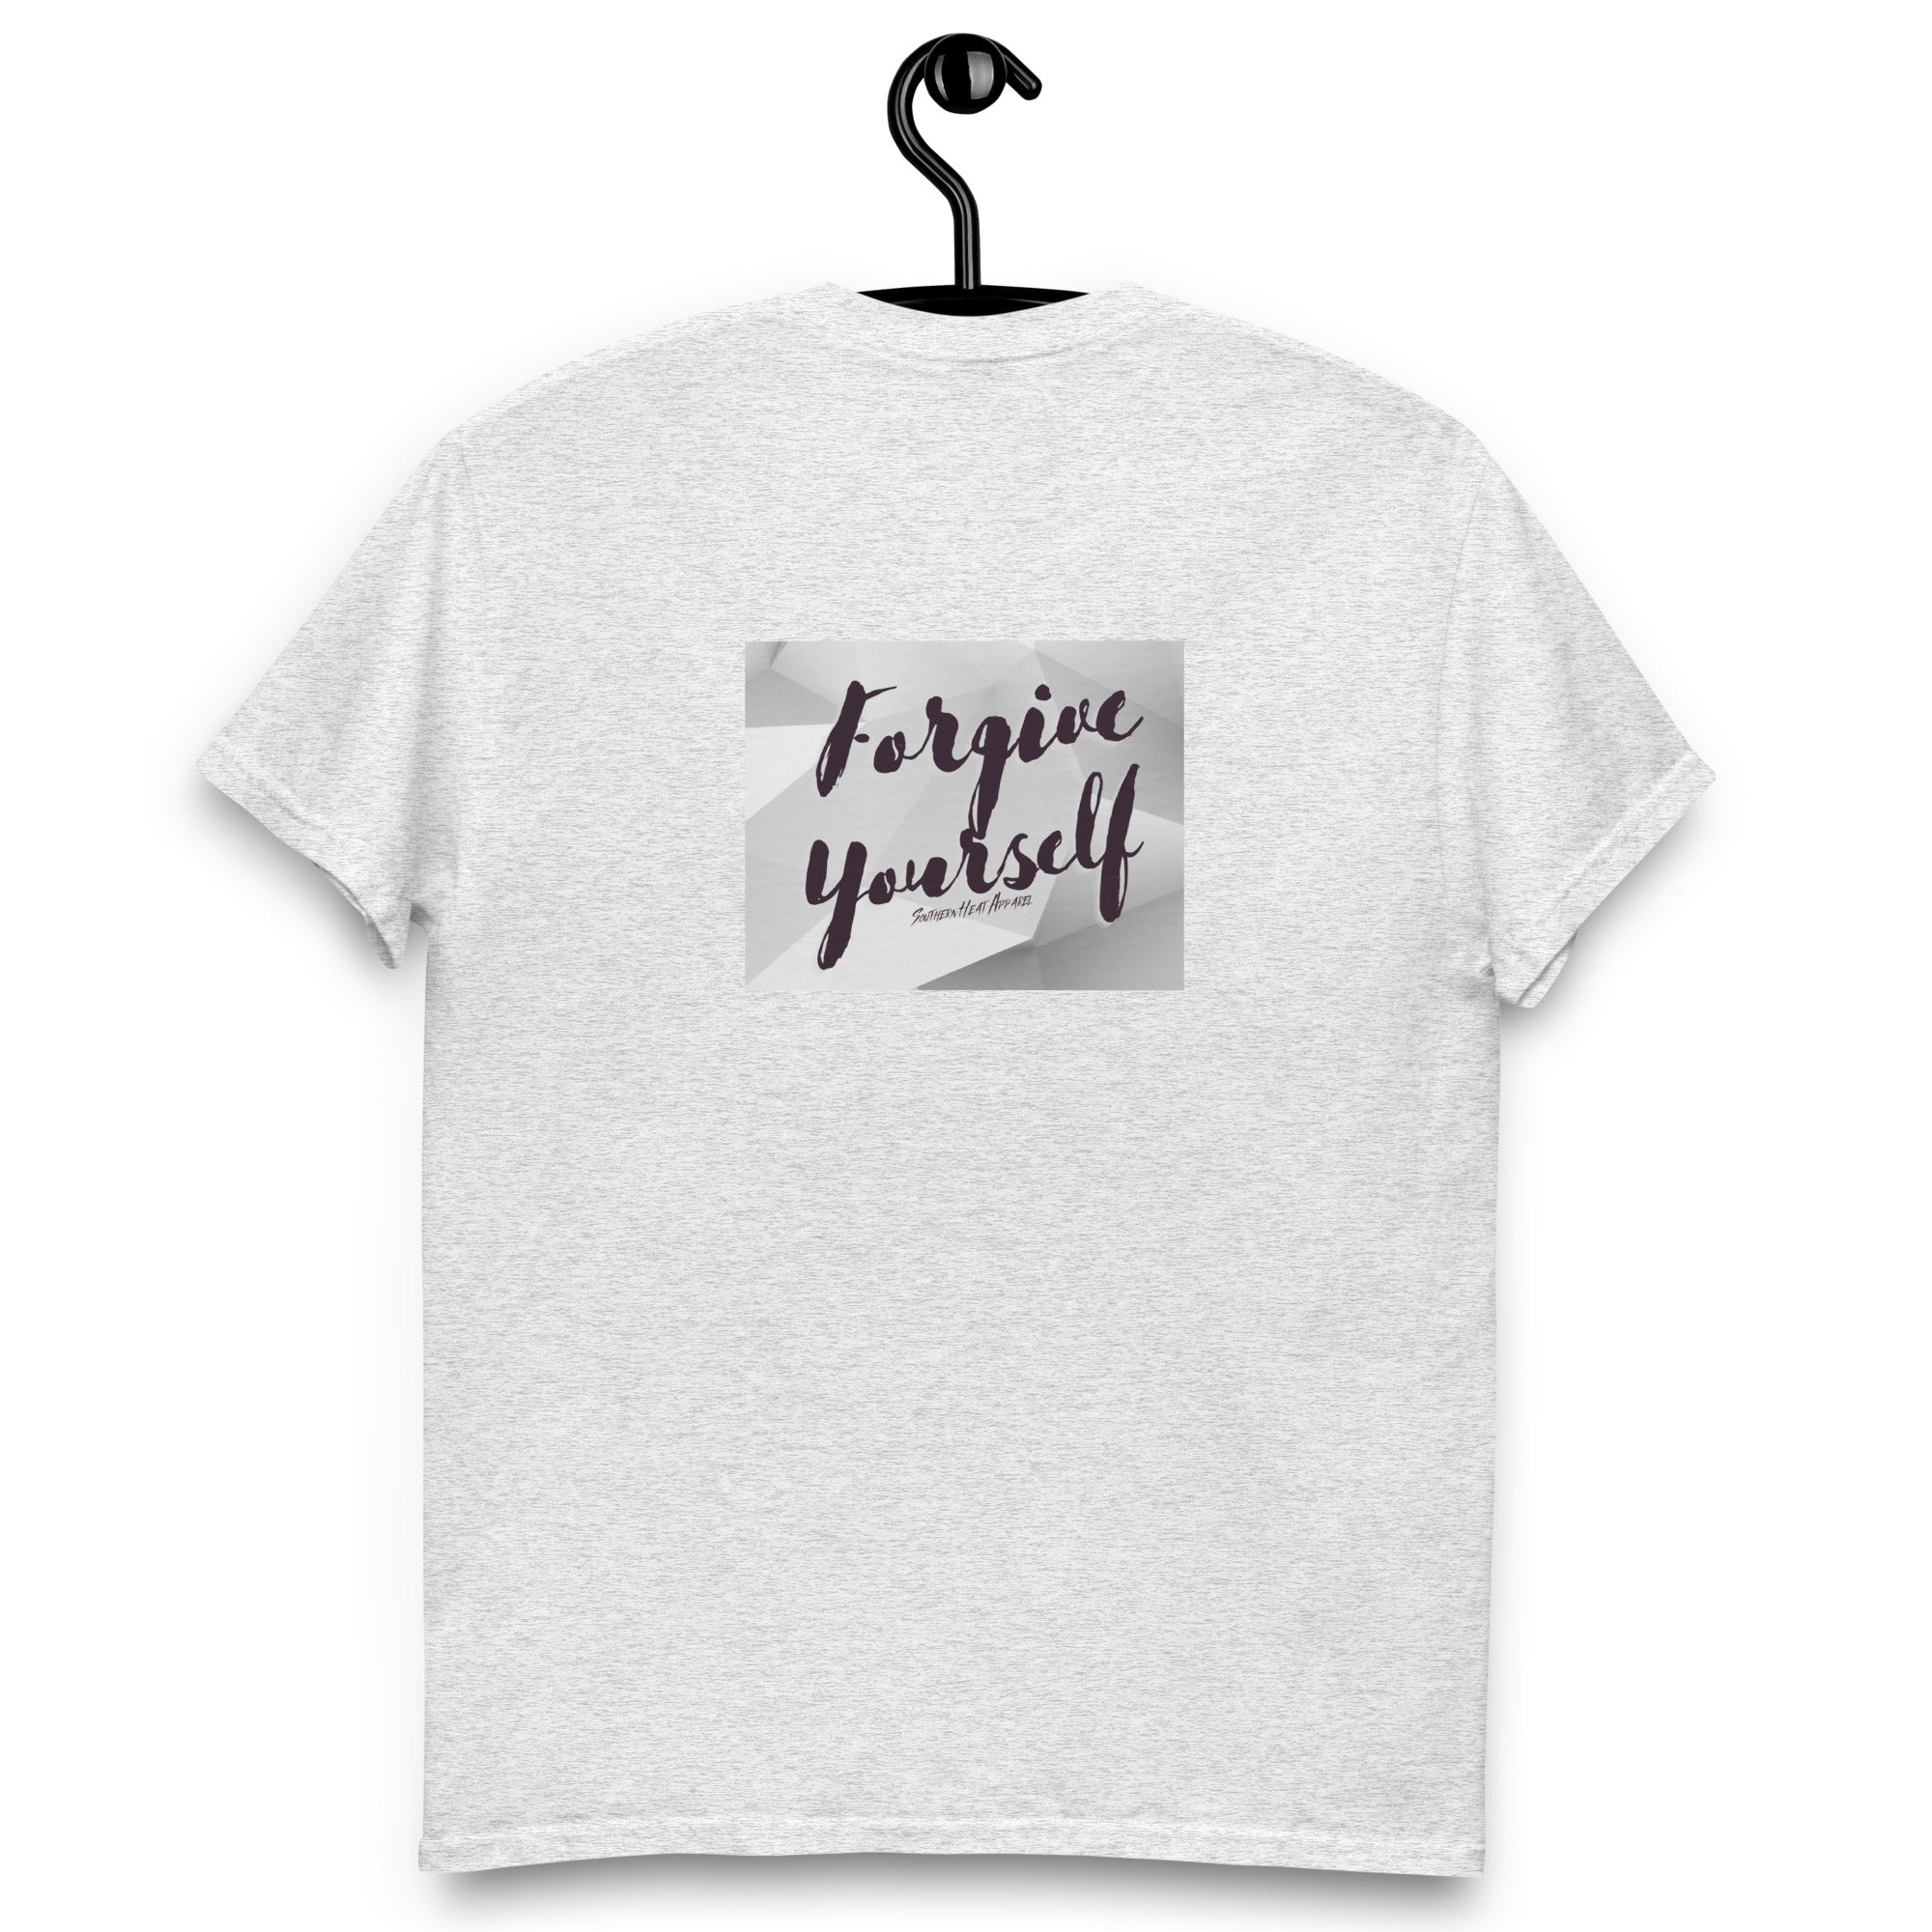 Forgive yourself-Men's classic tee